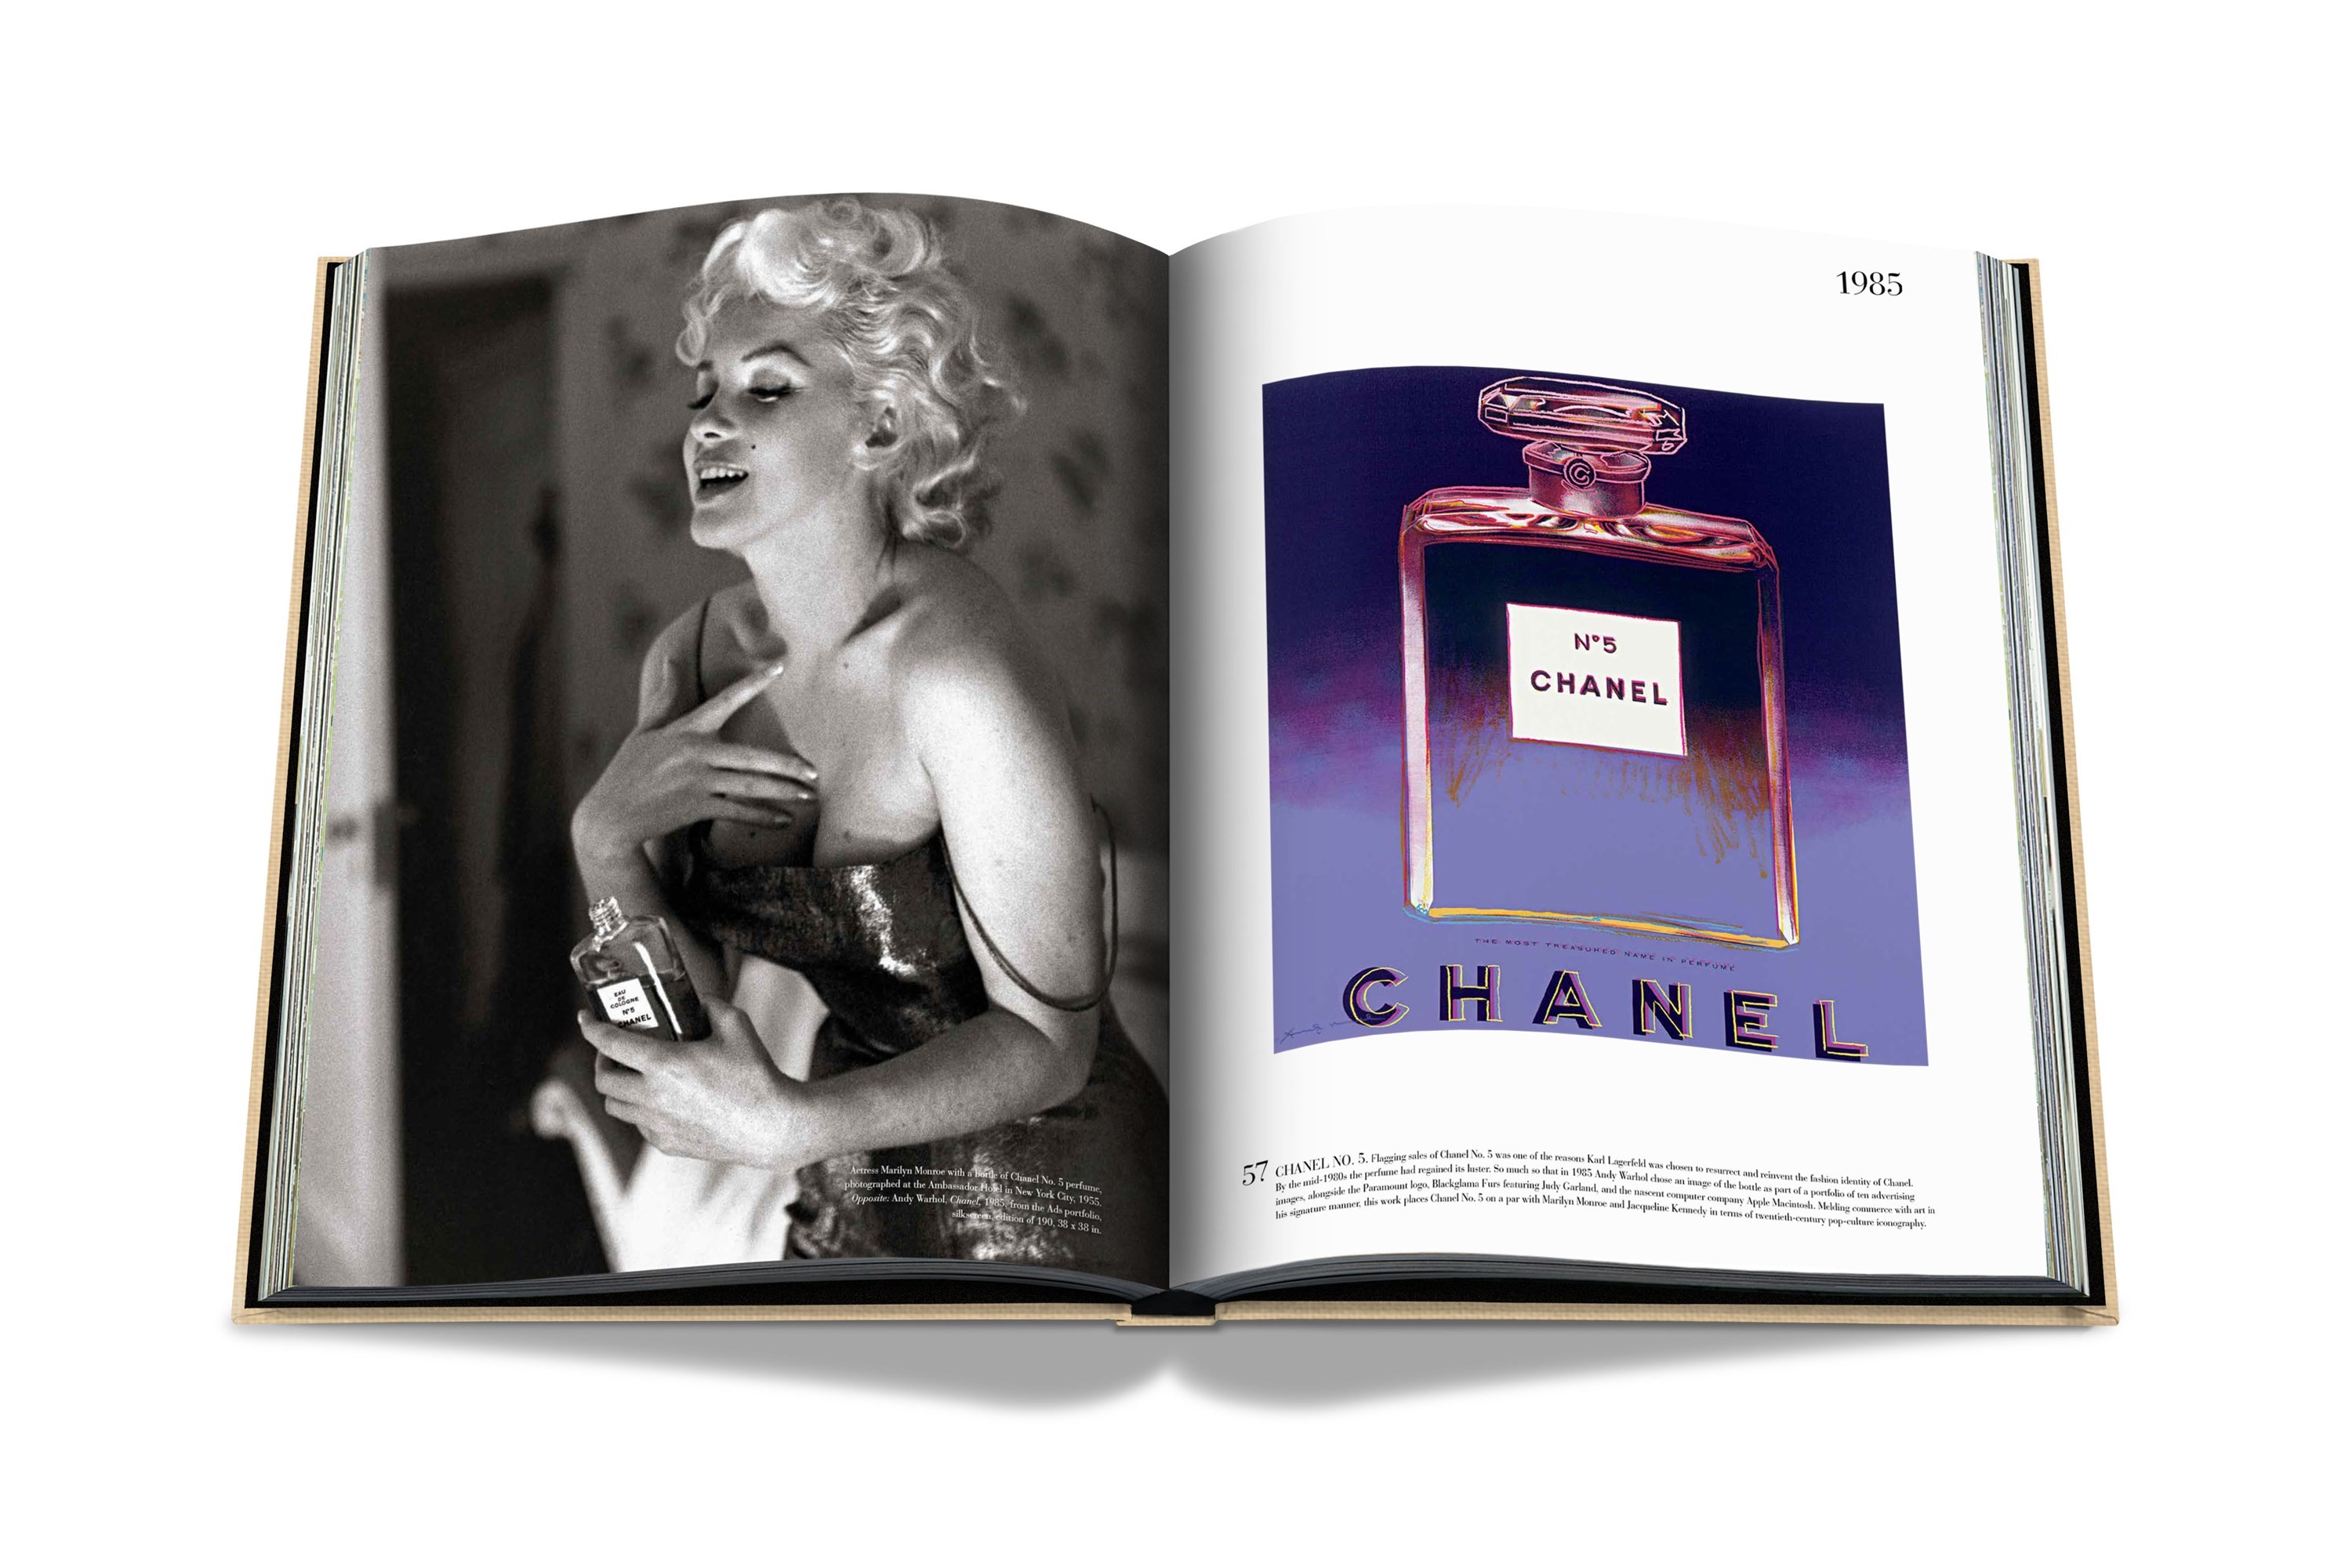 studieafgift Arrangement At placere Alexander Fury: The Ten Chanel Commandments | AnOther